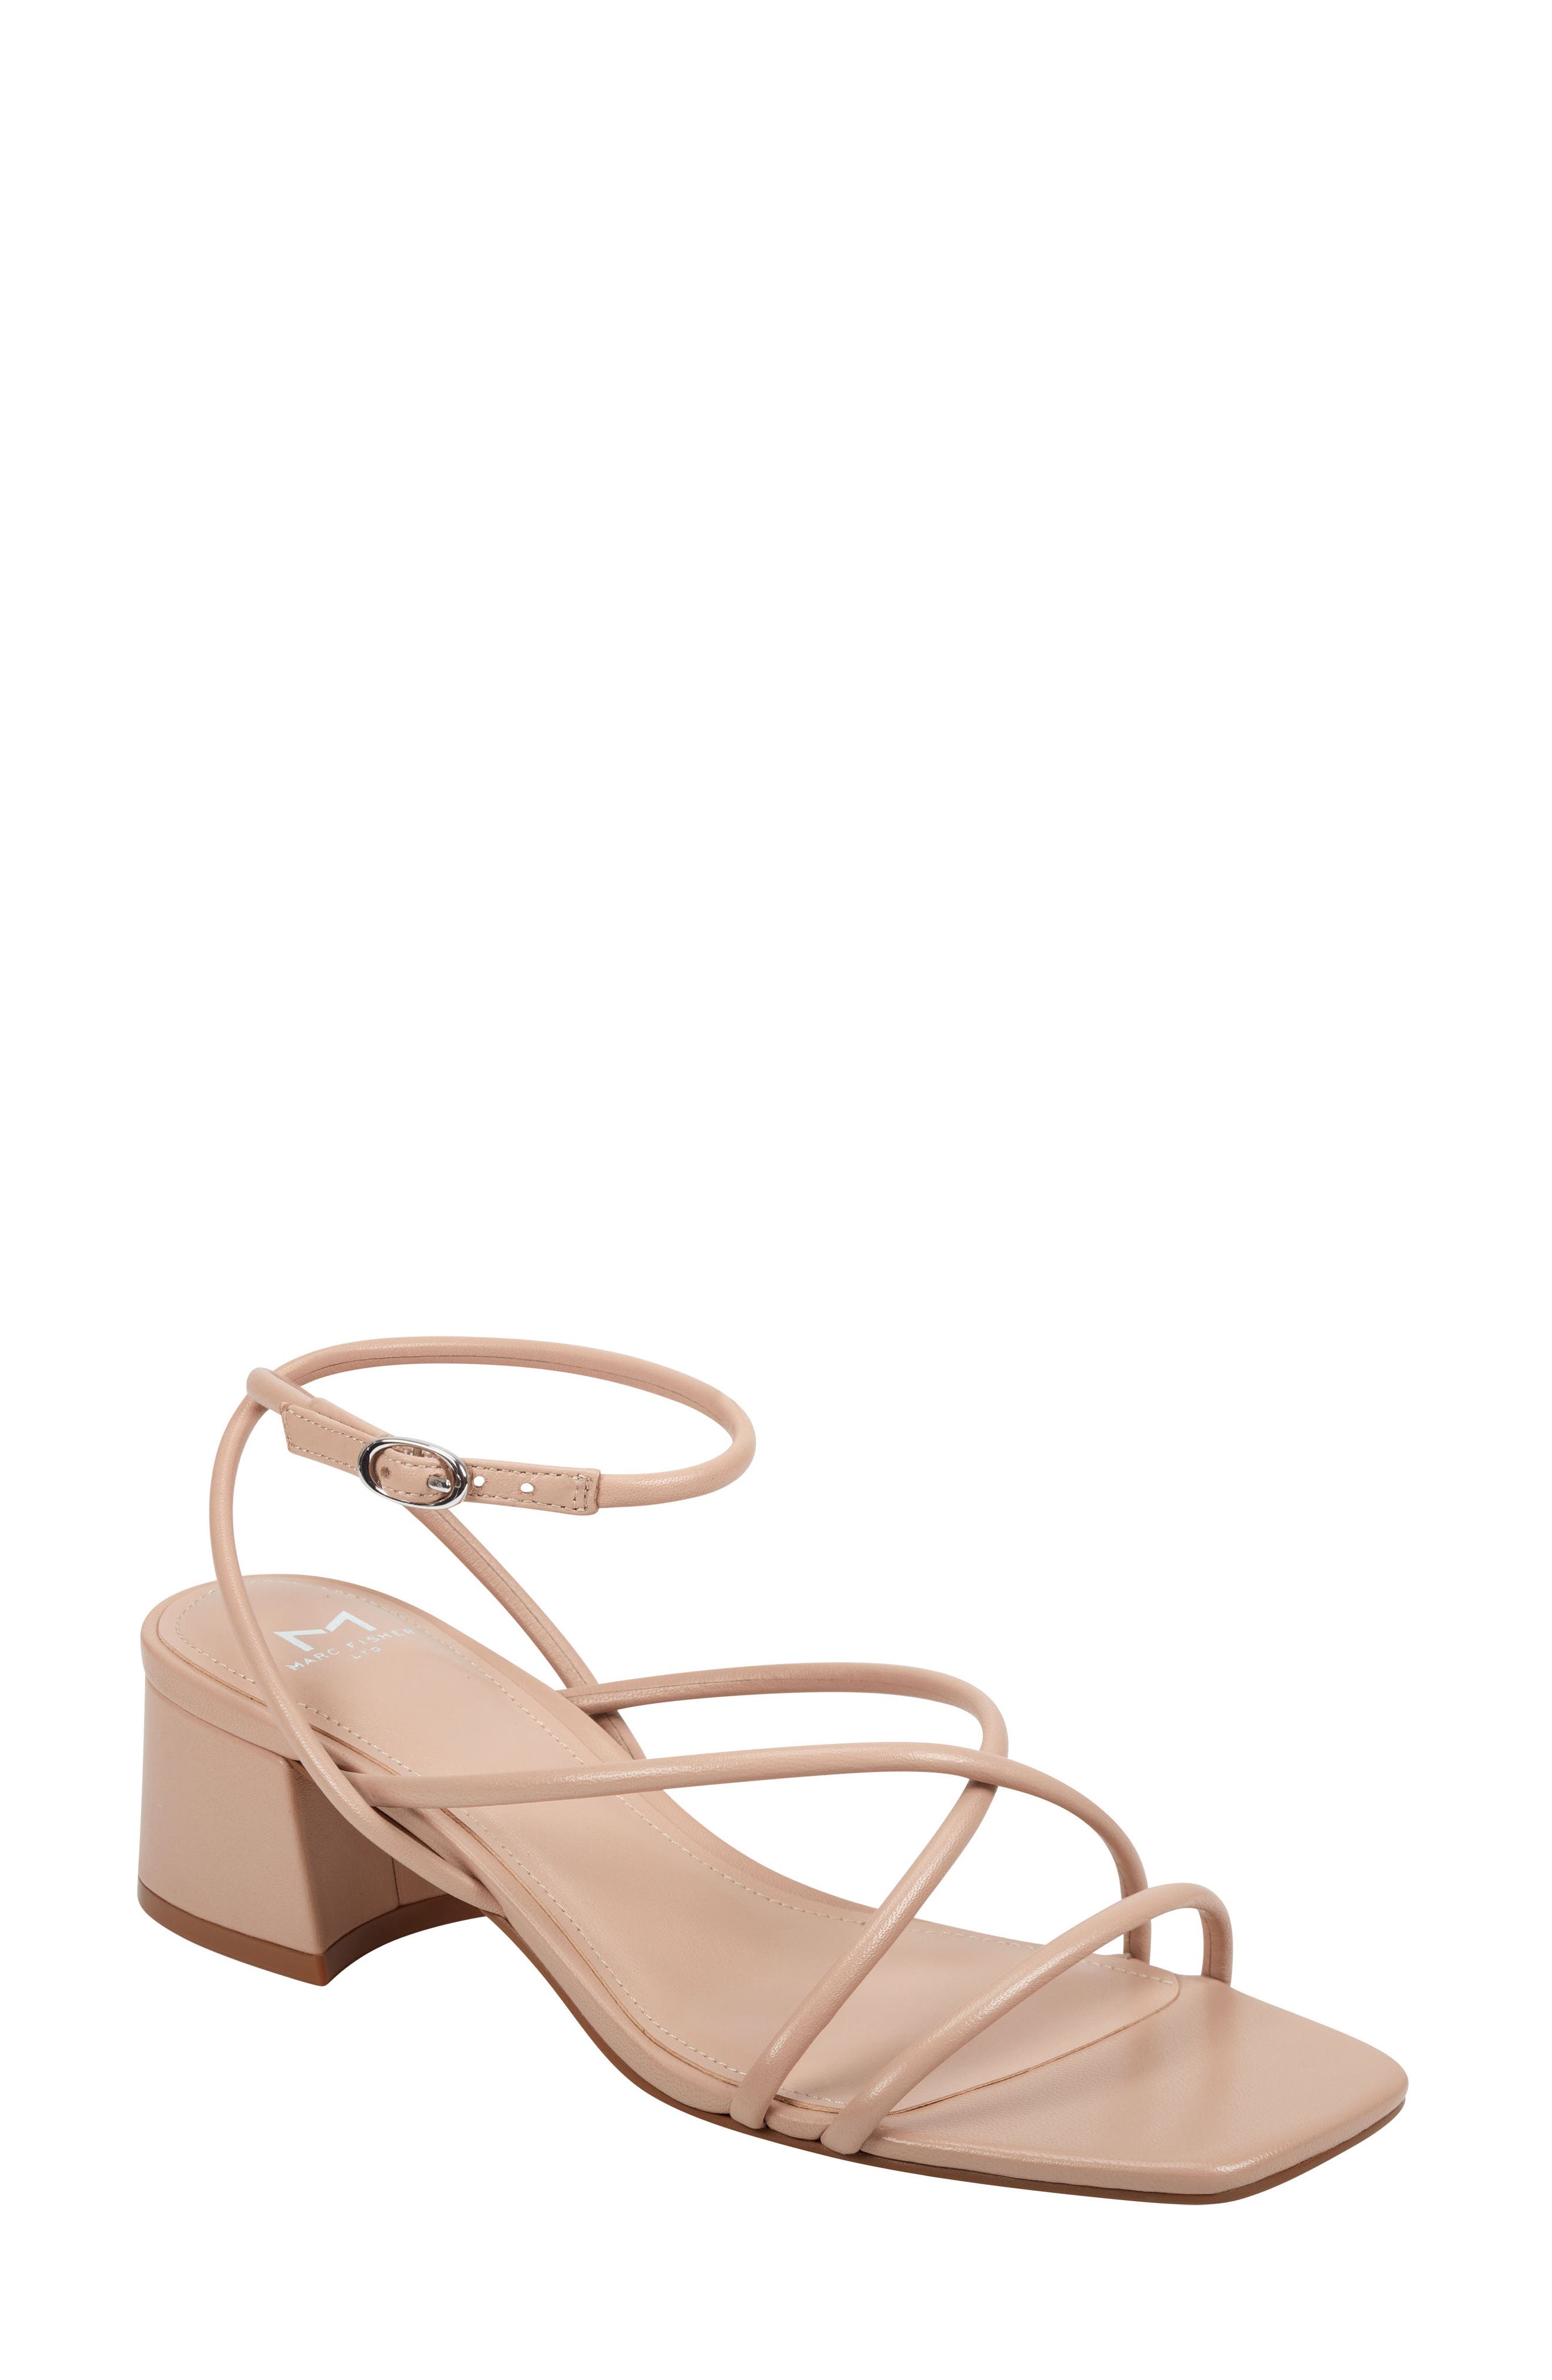 marc fisher nude wedges